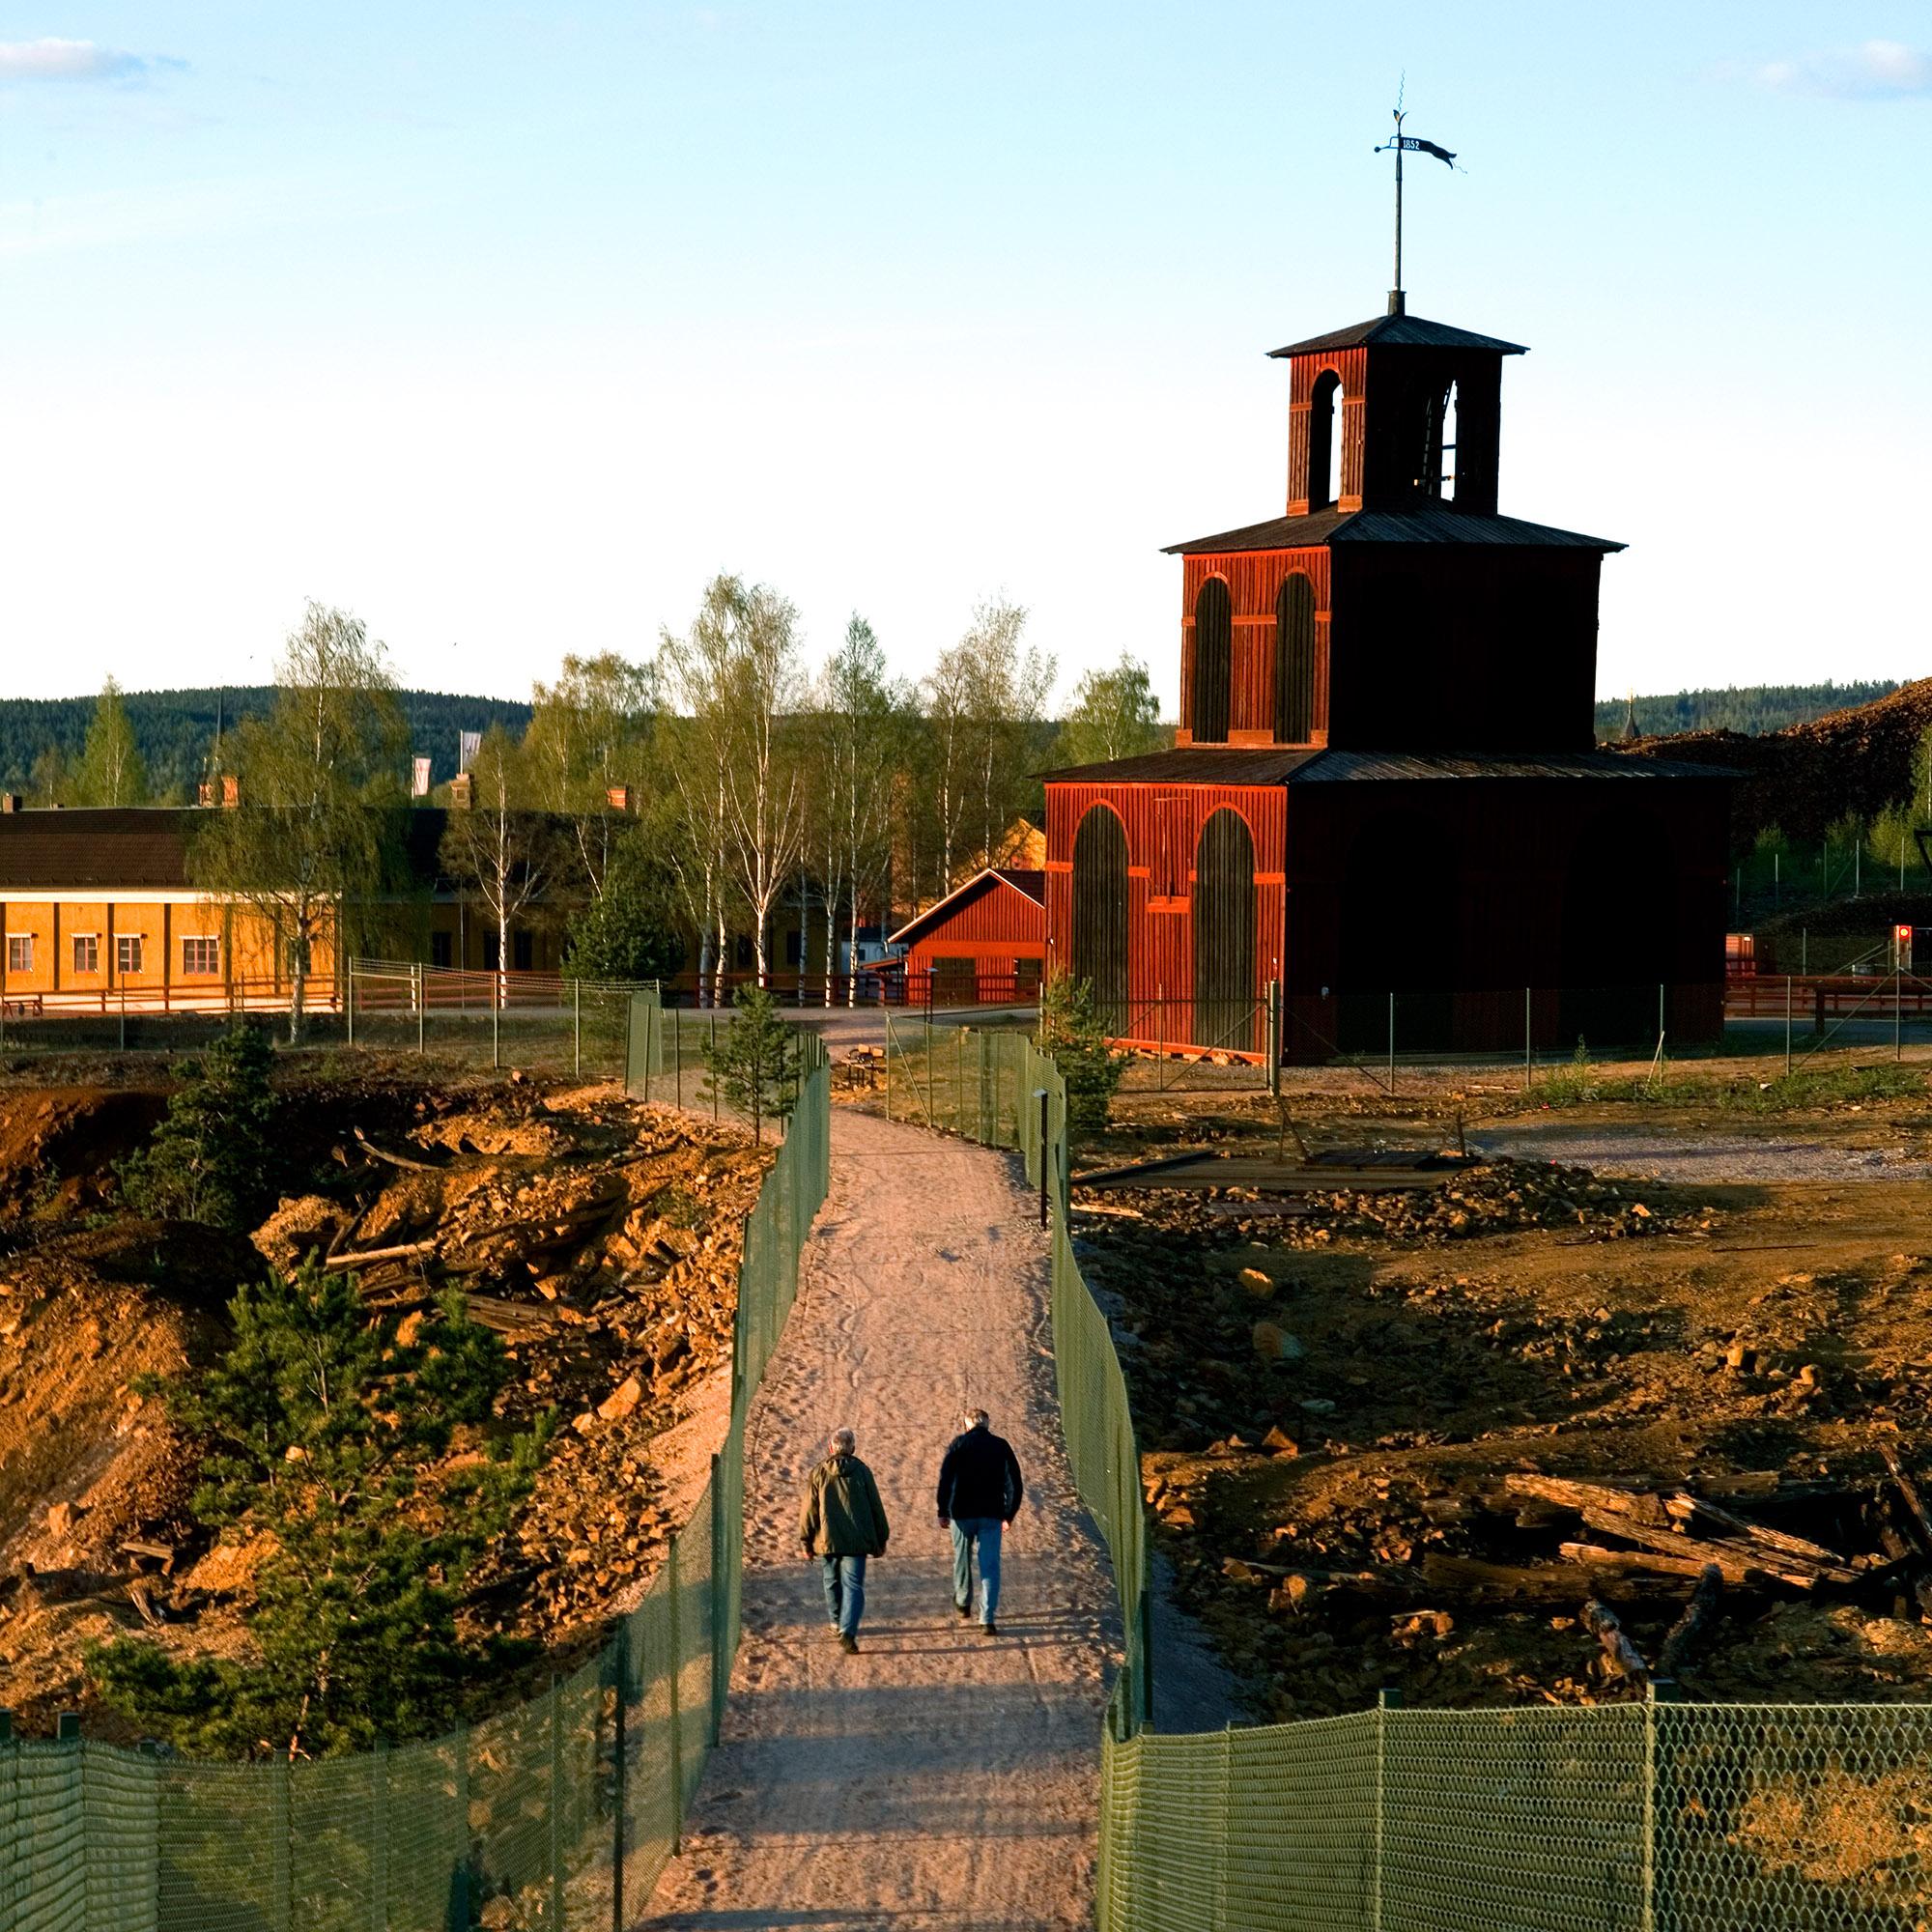 The 1.6 kilometre mine walk close to the Great Pit is landscaped to give every visitor the opportunity to experience the interesting above ground mine area. - © Birgitta Wahlberg